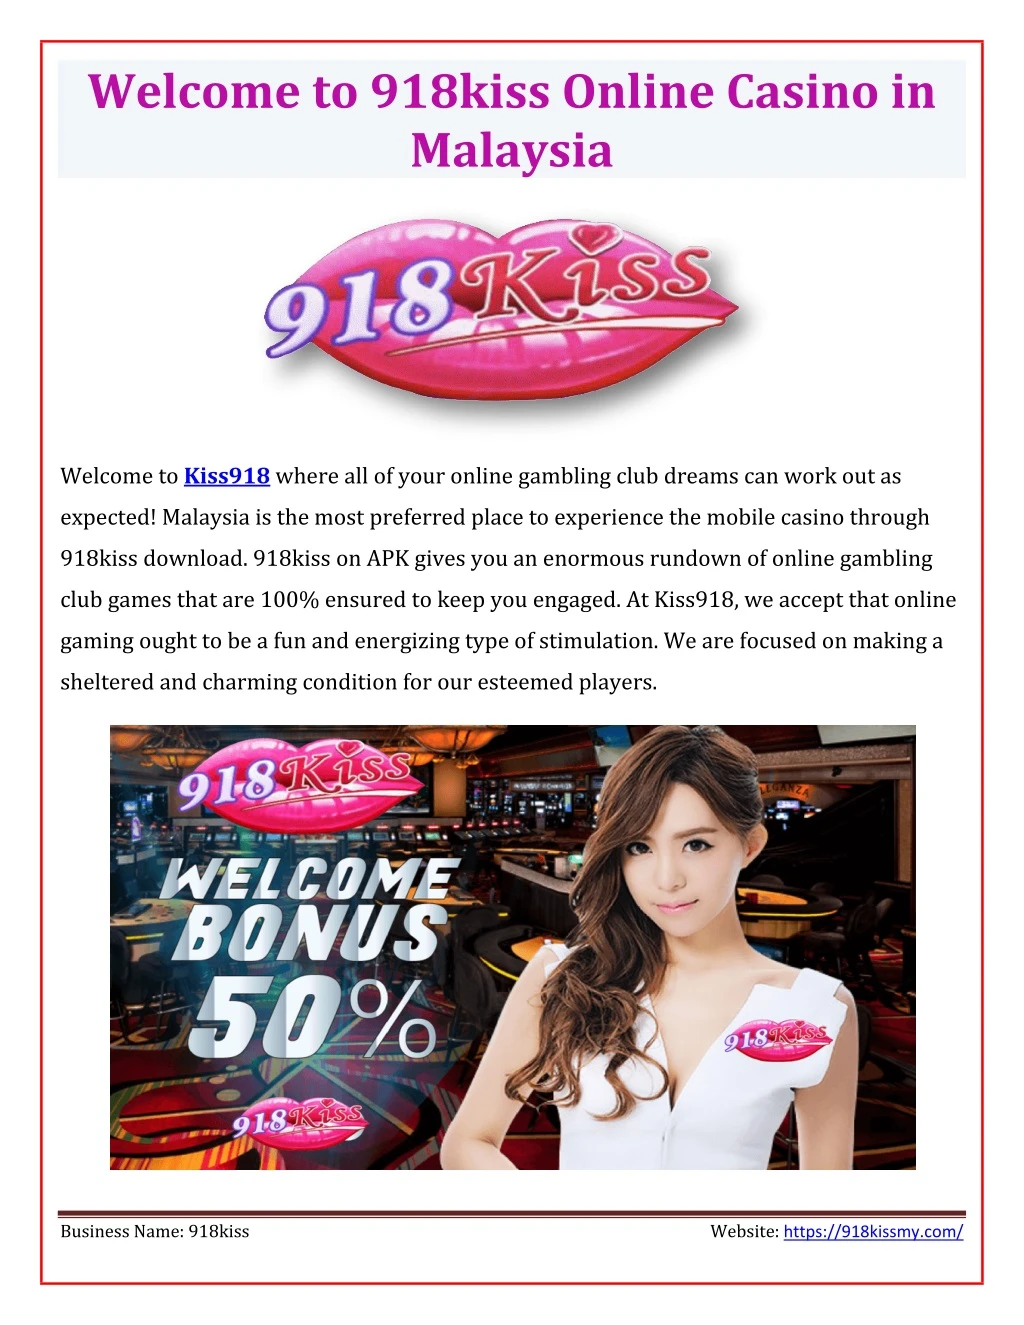 welcome to 918kiss online casino in malaysia